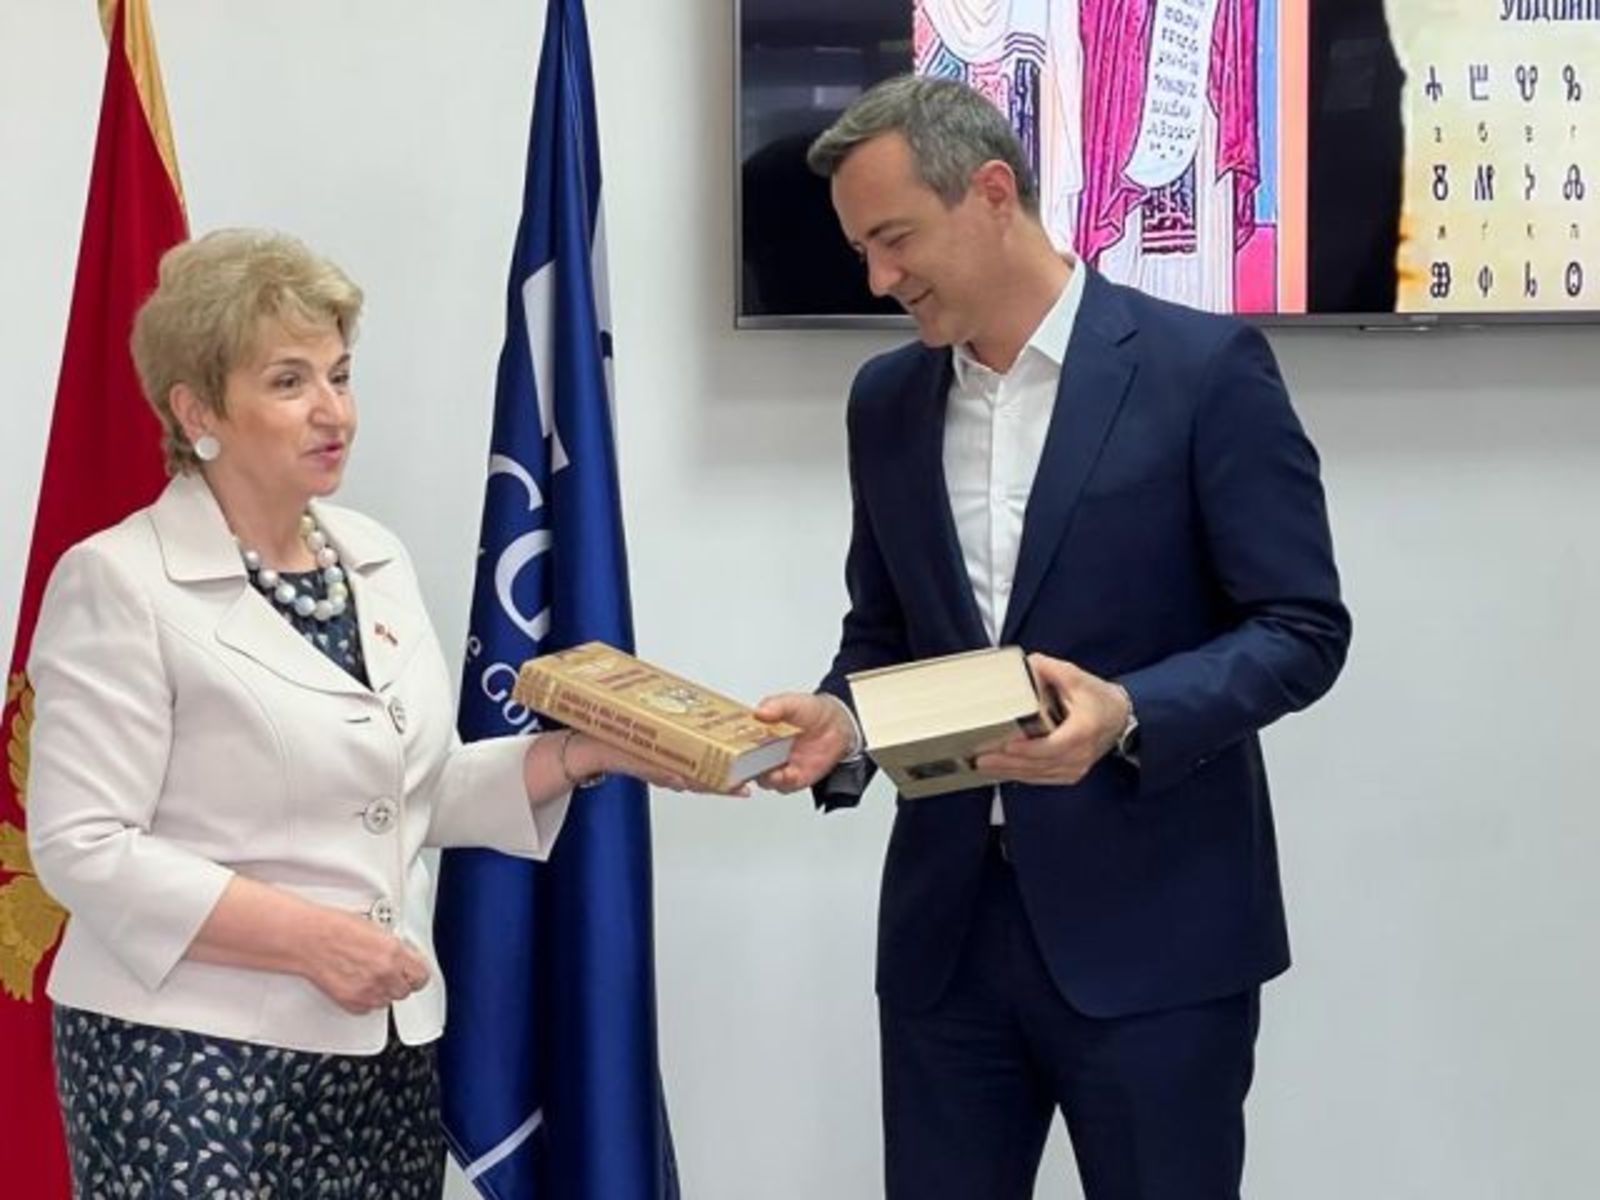 The exhibition "Alphabet and History" was opened at the Rectorate of the University of Montenegro